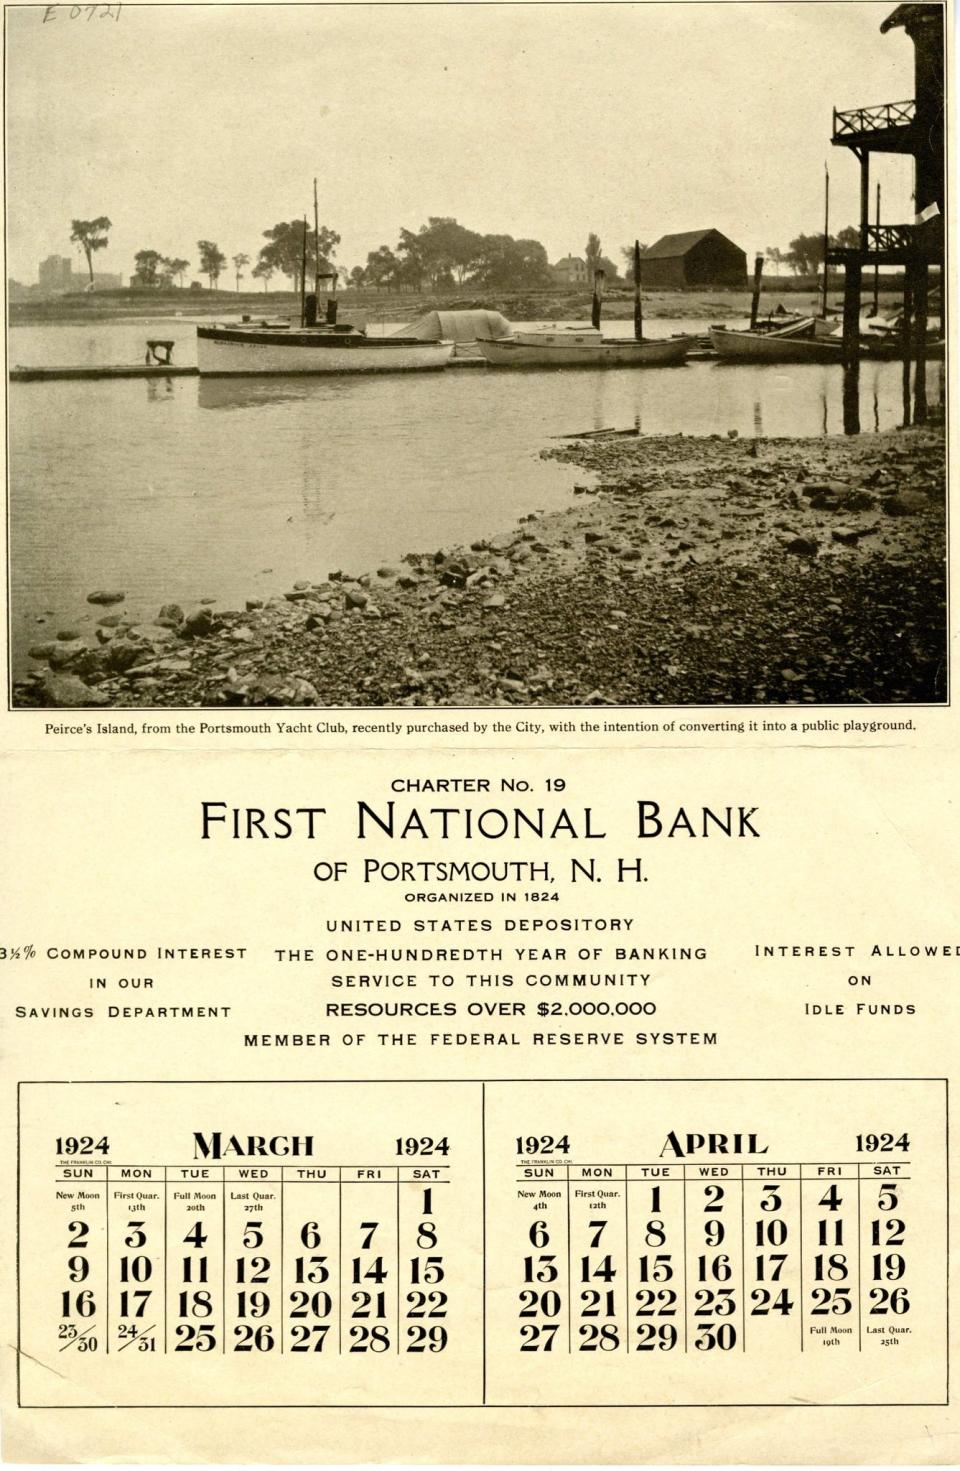 The March-April 1923 First National Bank Centennial Calendar shows Peirce Island and notes Portsmouth intended to convert the island into a playground, possibly including a pool.